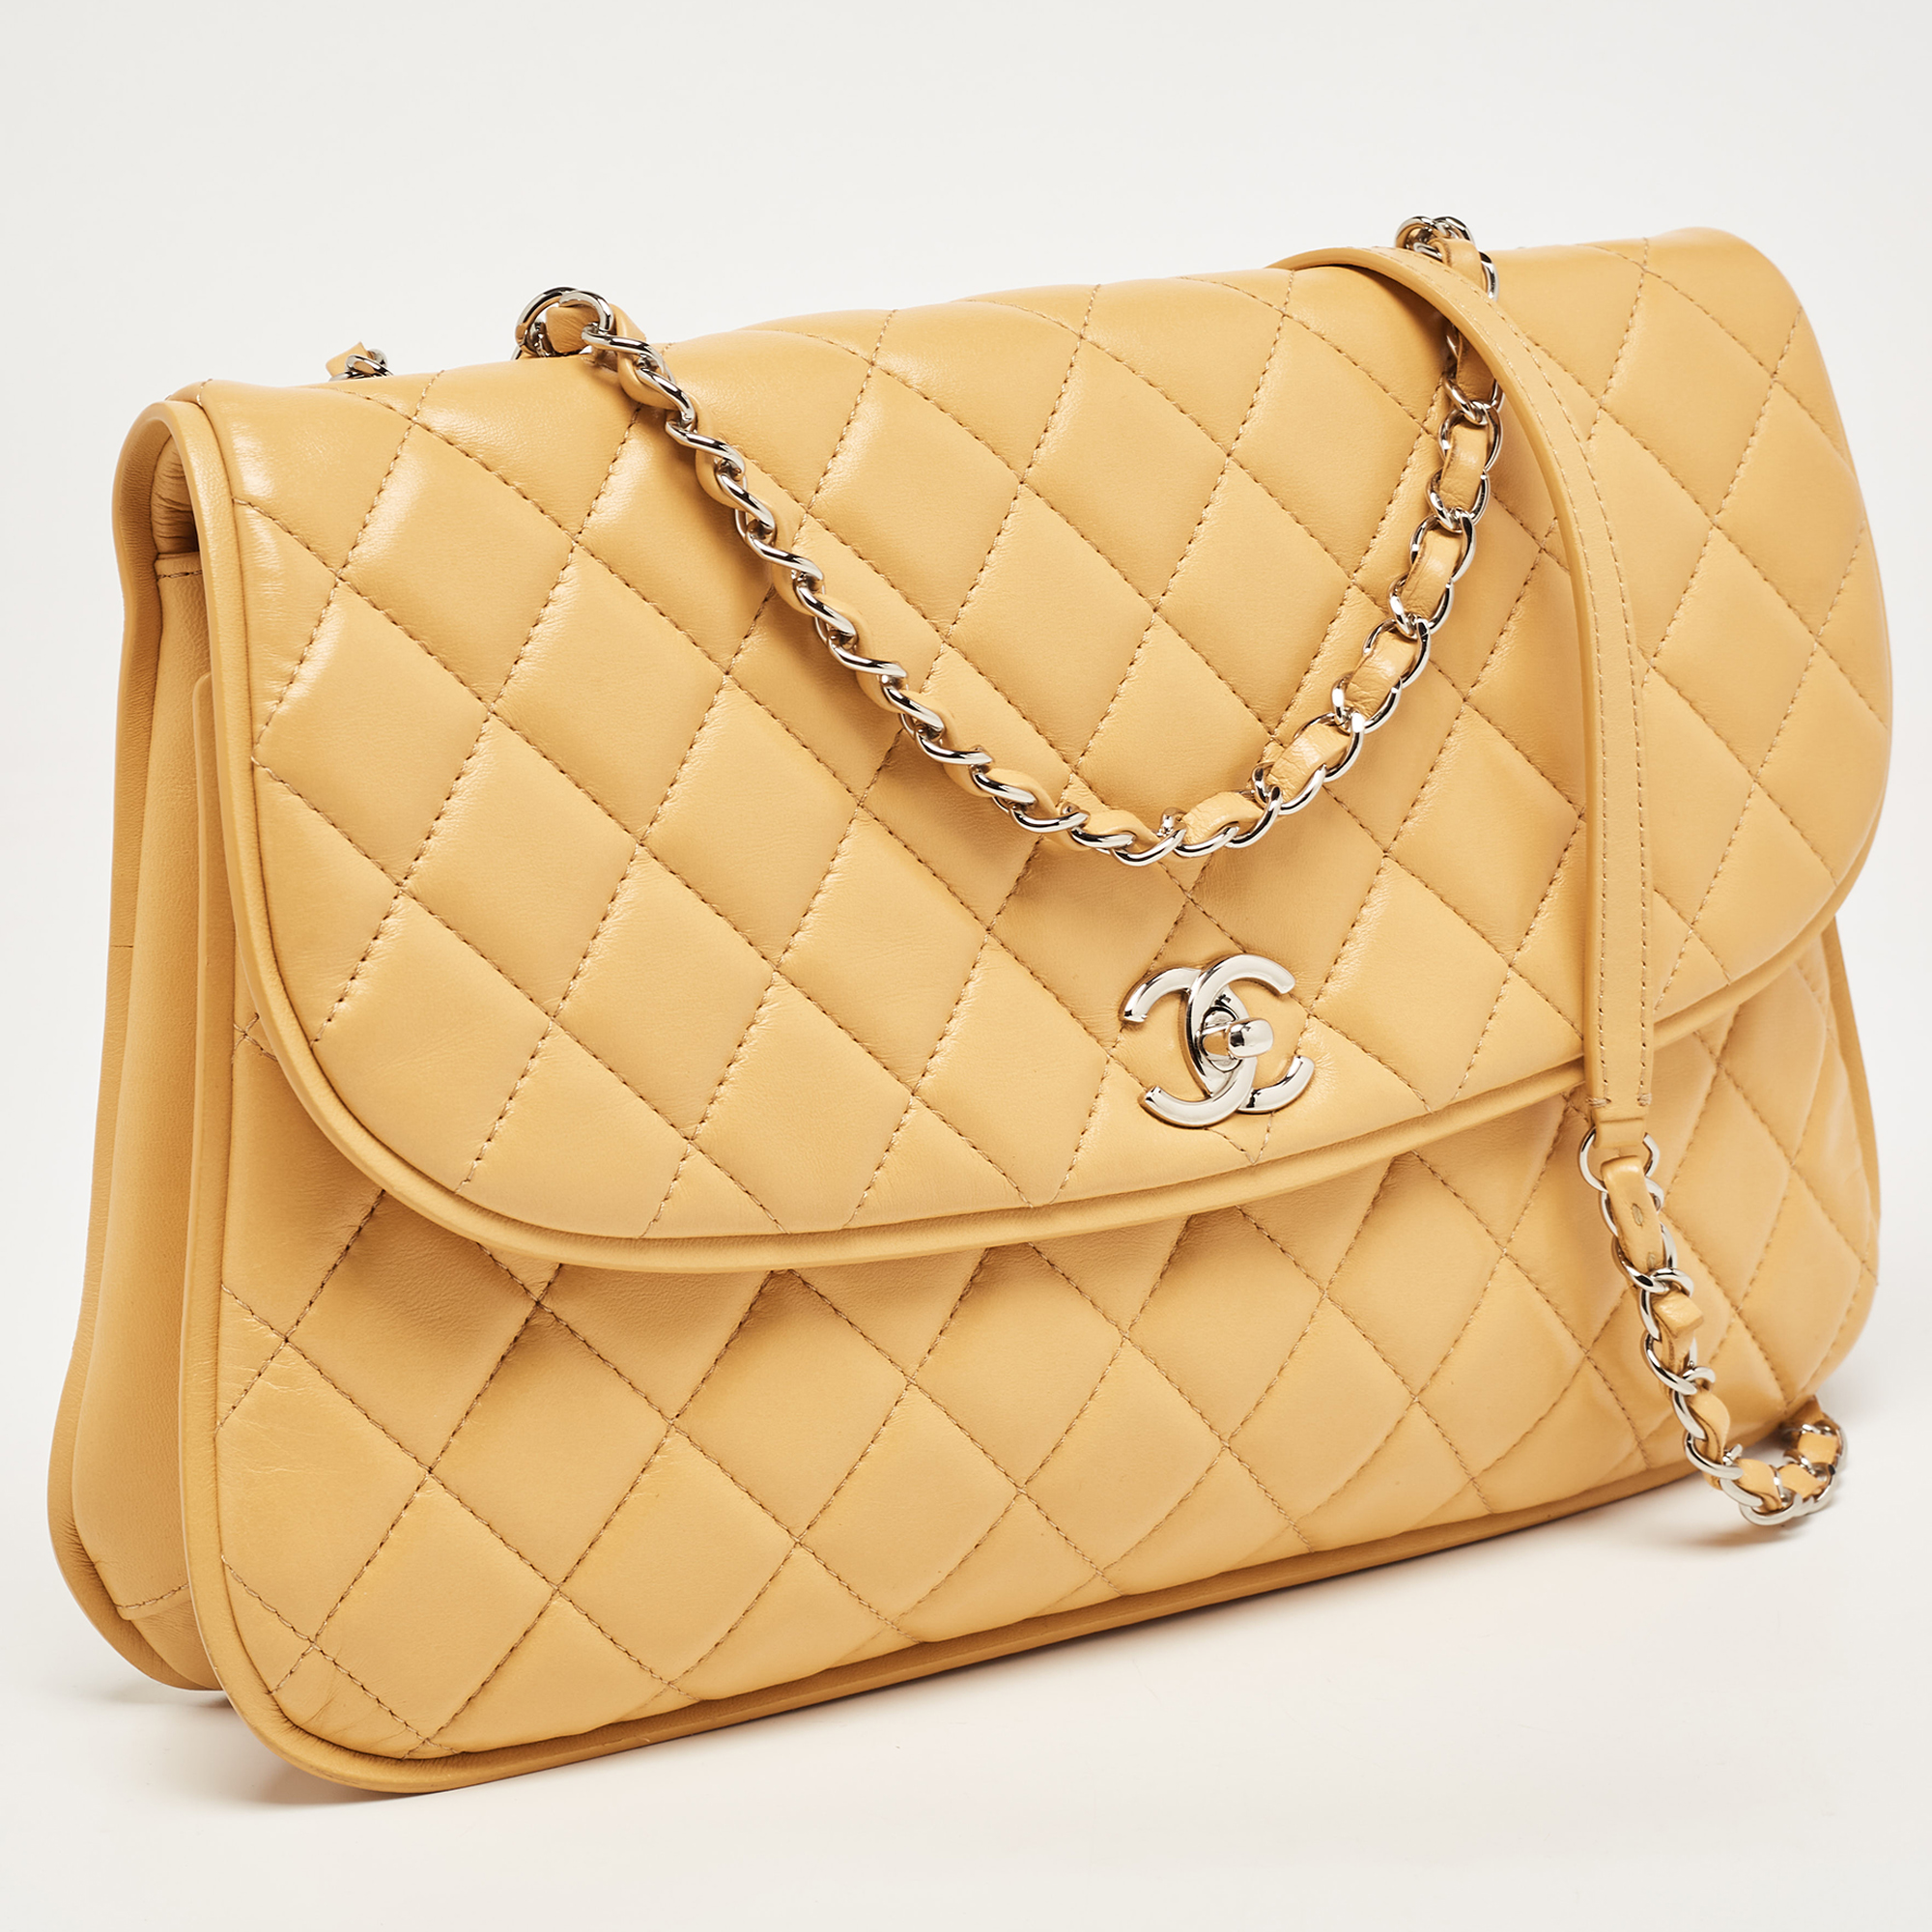 Chanel Yellow Quilted Leather Large Pagode Piping Flap Bag